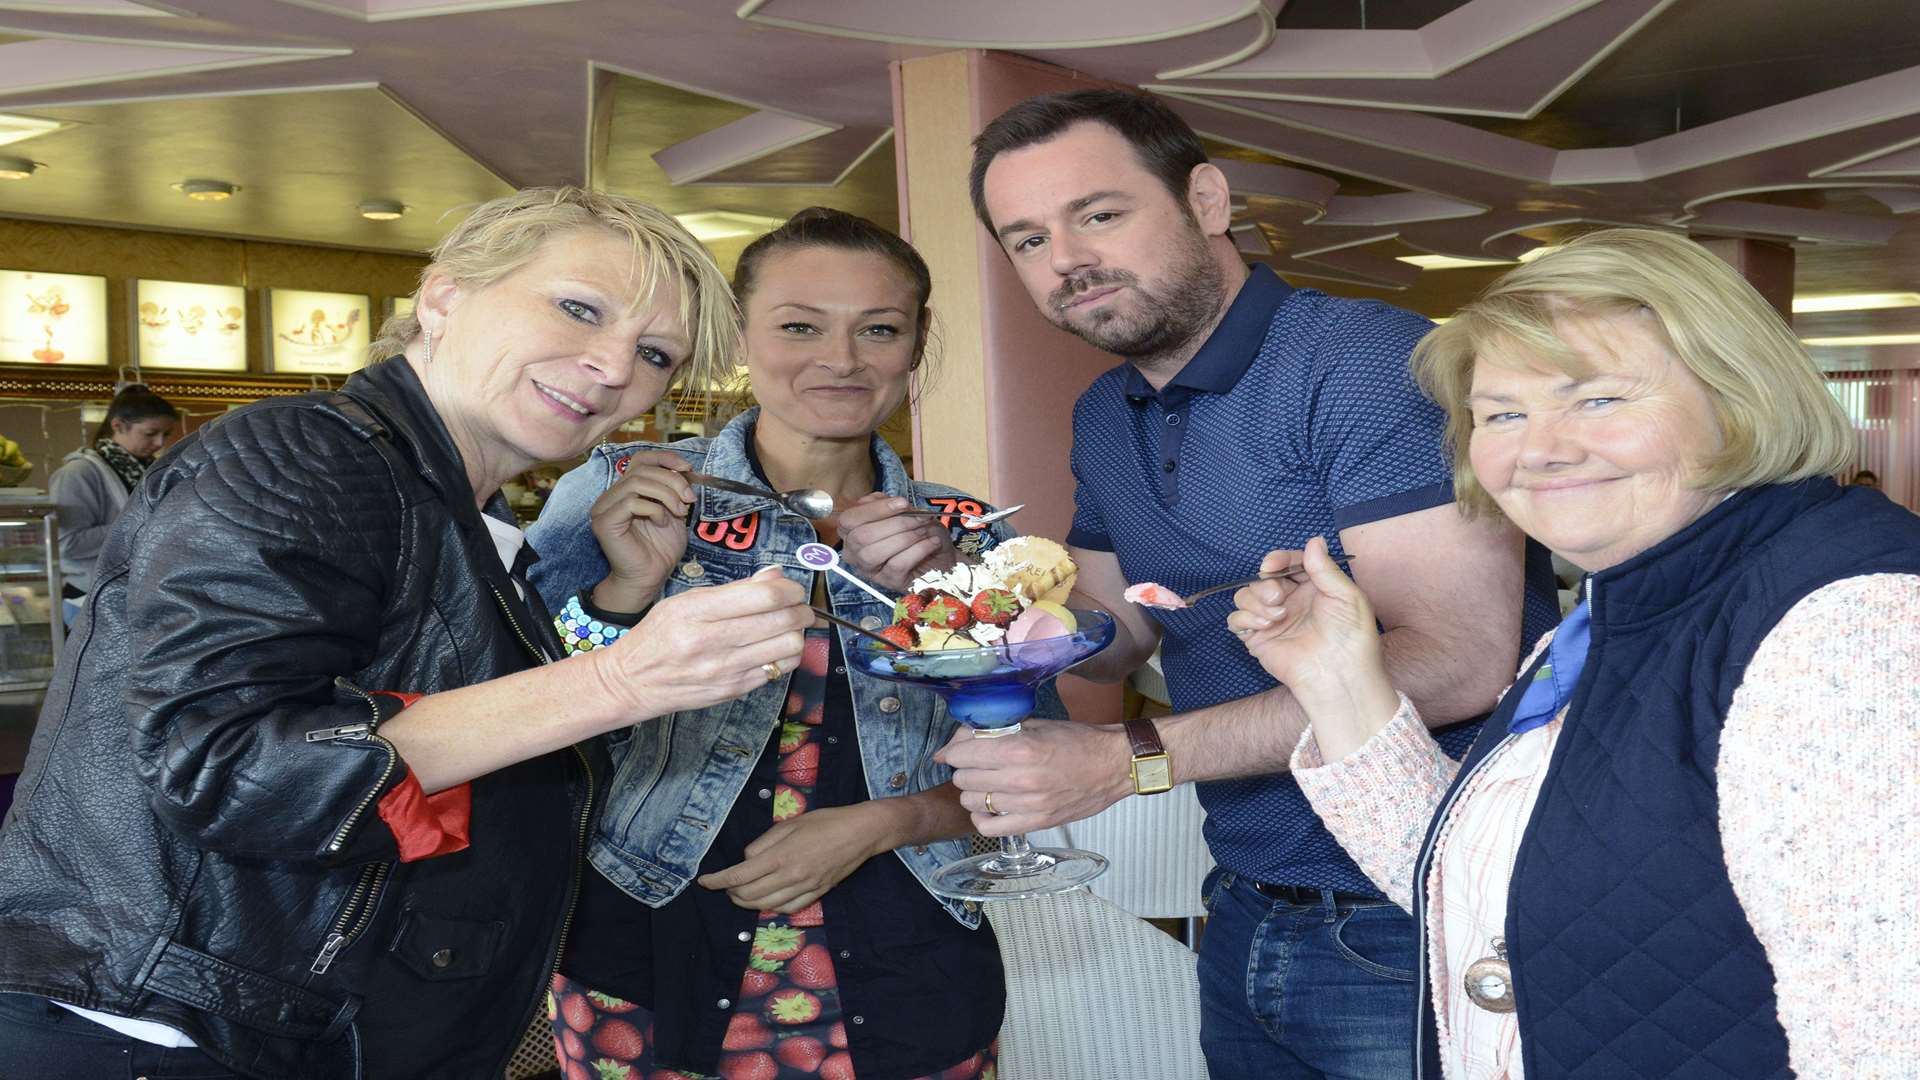 Shirley Carter (Linda Henry), Tina Carter (Luisa Bradshaw White), Mick Carter (Danny Dyer), and Aunt Babe (Annette Badland). Picture: Kieron McCarron